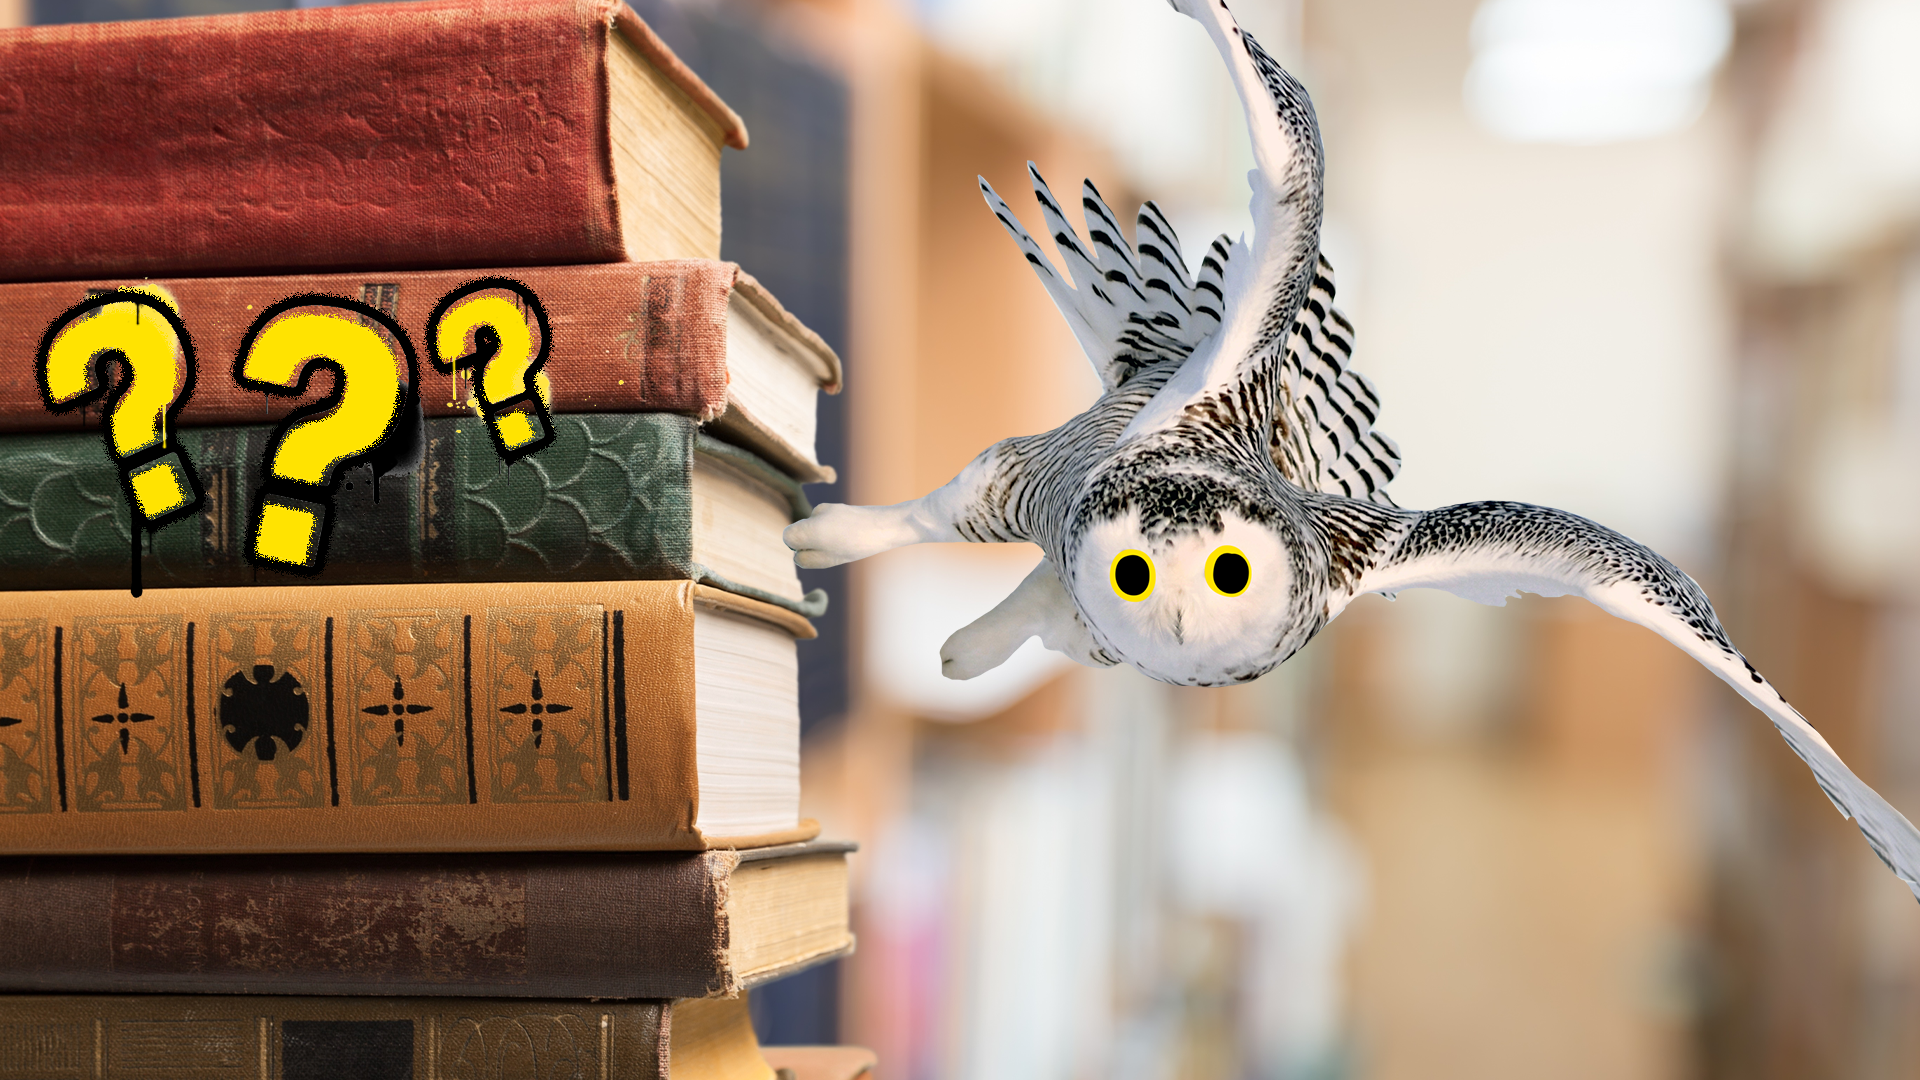 Stack of old books, an owl and some question marks